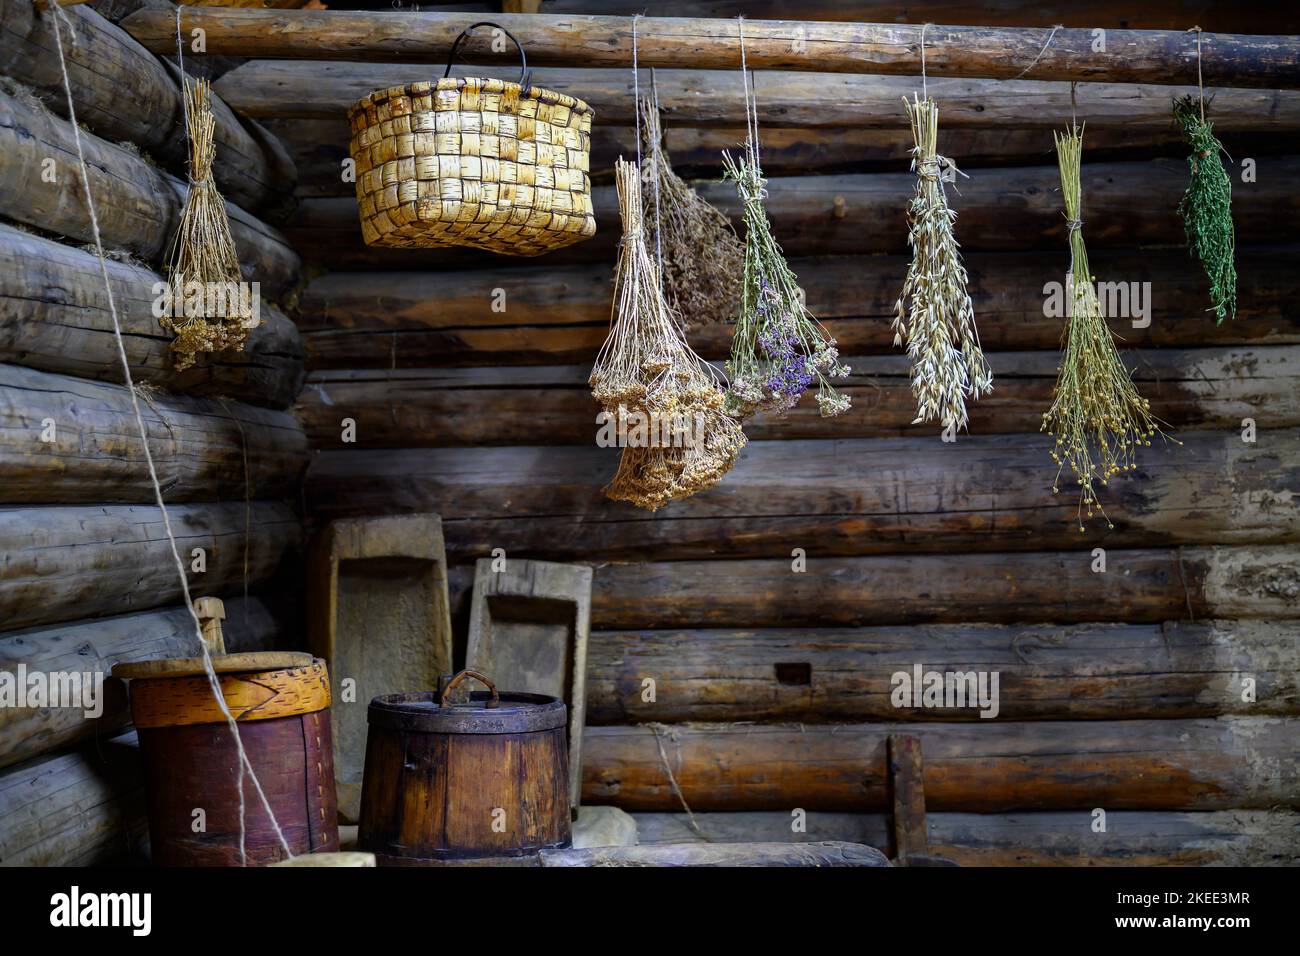 Medicinal herbs are dried in the interior of the summer kitchen of a wooden house built in 1912 in a Siberian village Stock Photo